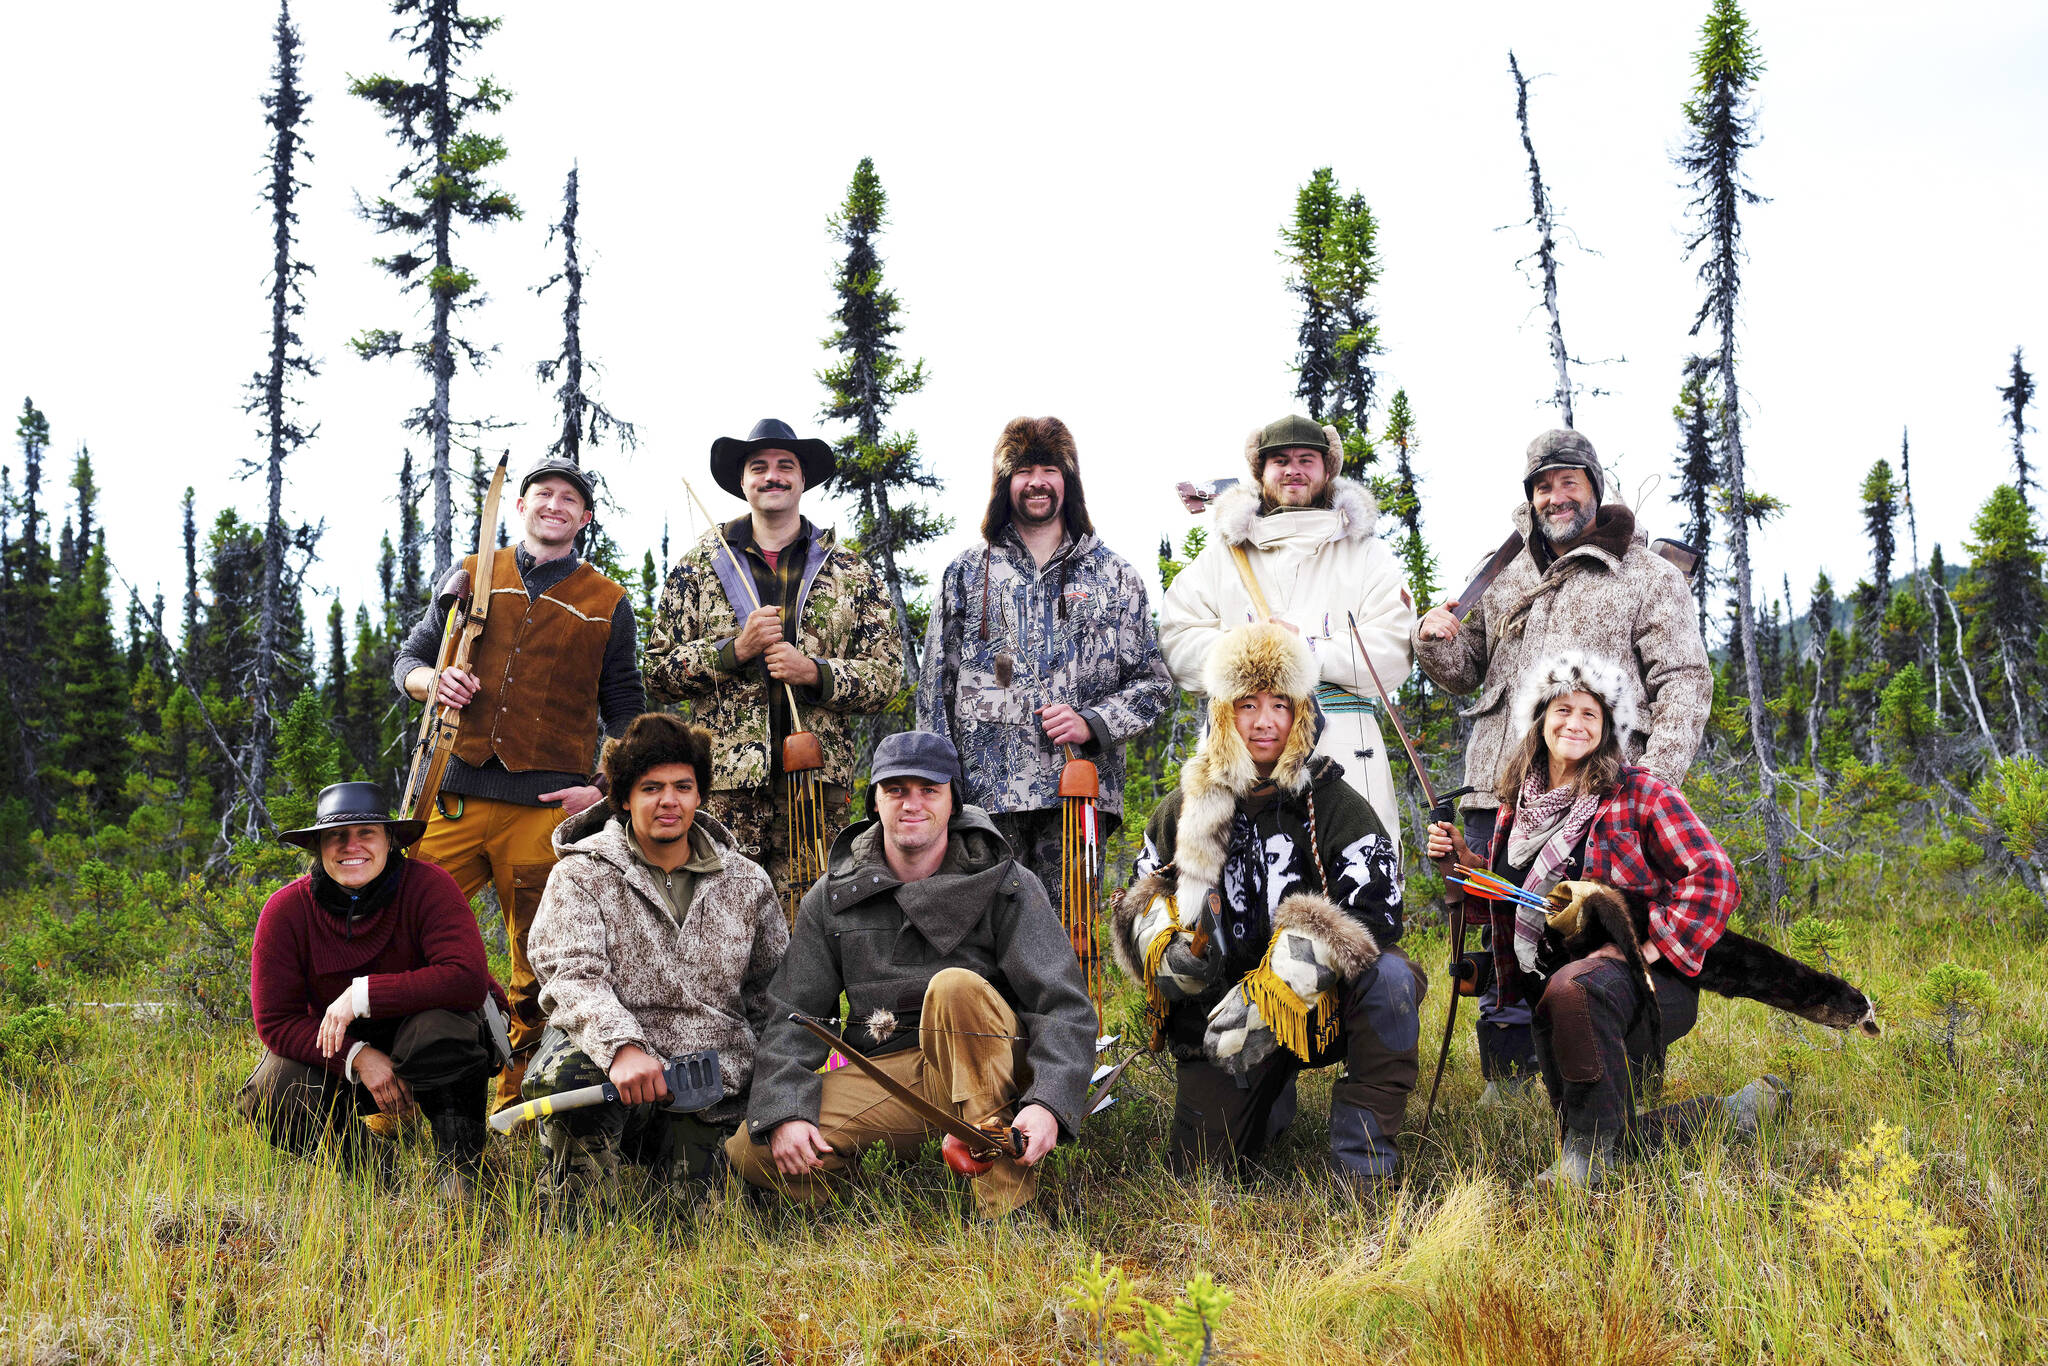 The 10 participants in season 9 of “Alone,” premiering on May 26, 2022, on the History Channel. Terry Burns of Homer is the third from left, back. Another Alaskan in the series, Jacques Tourcotte of Juneau, is the fourth from left, back. (Photo by Brendan George Ko/History Channel)